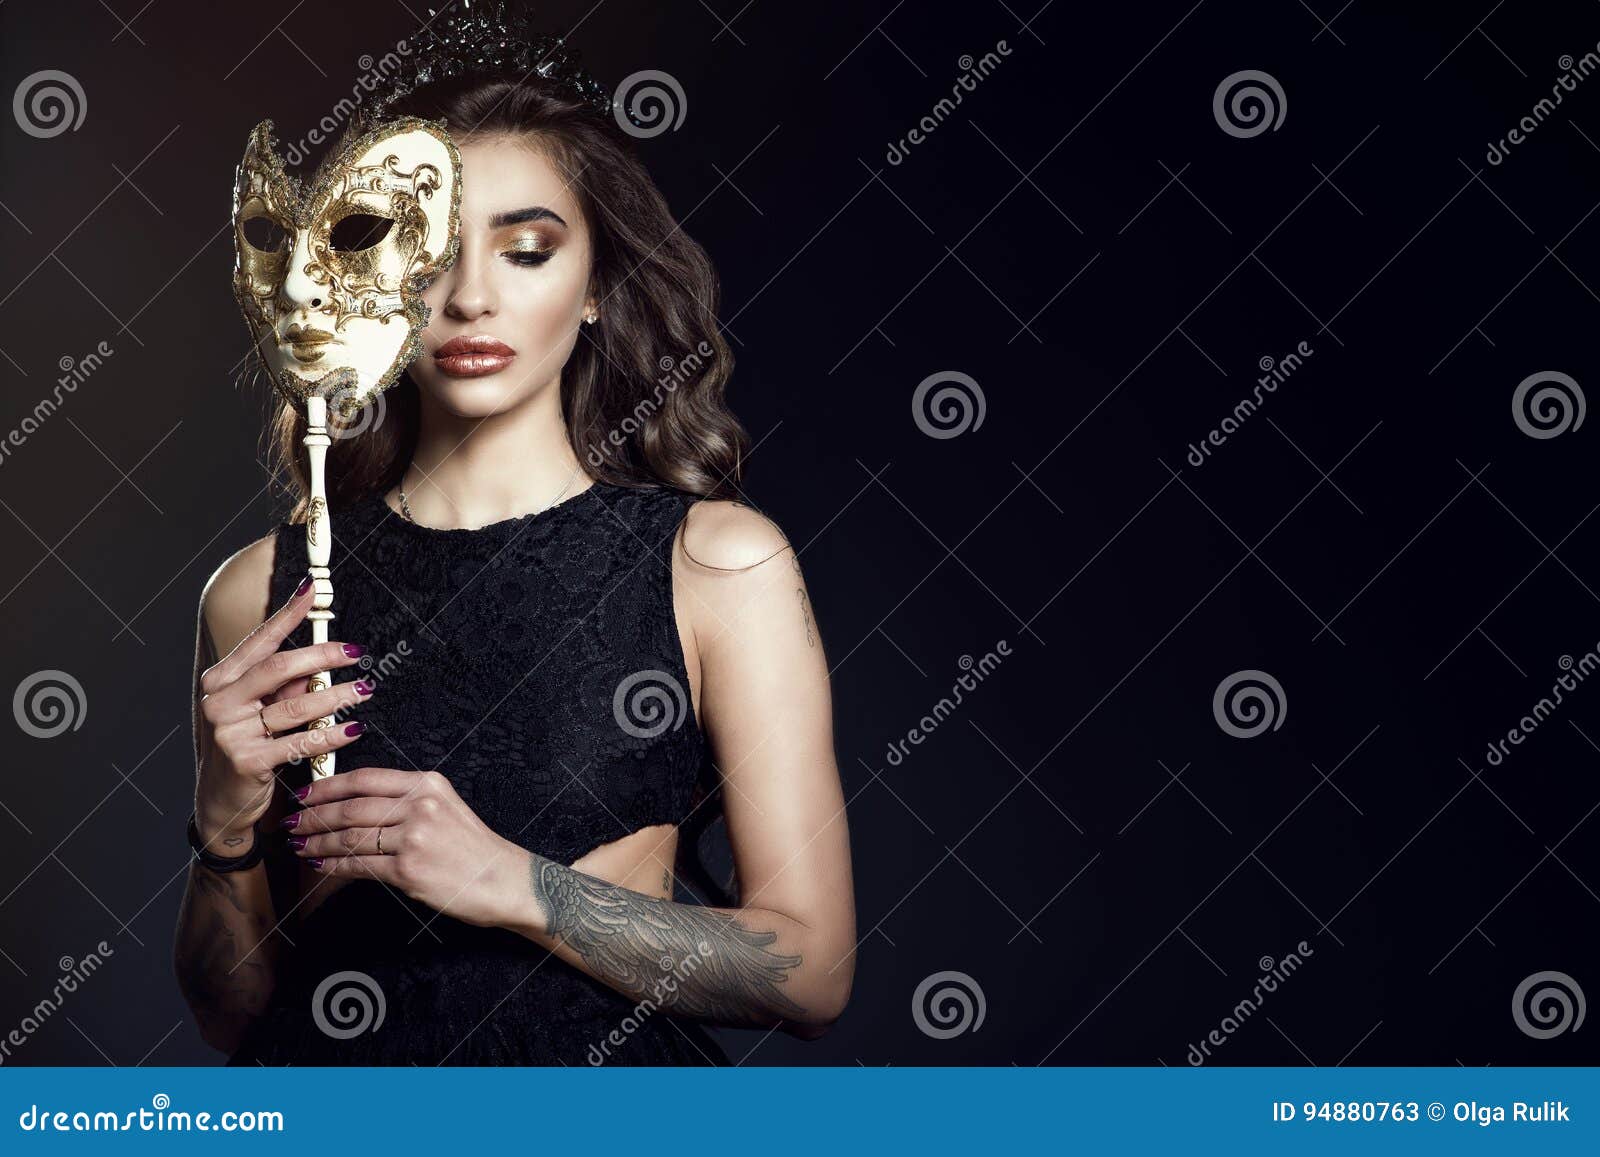 beautiful lady with closed eyes hiding the half of her face behind the venetian mask